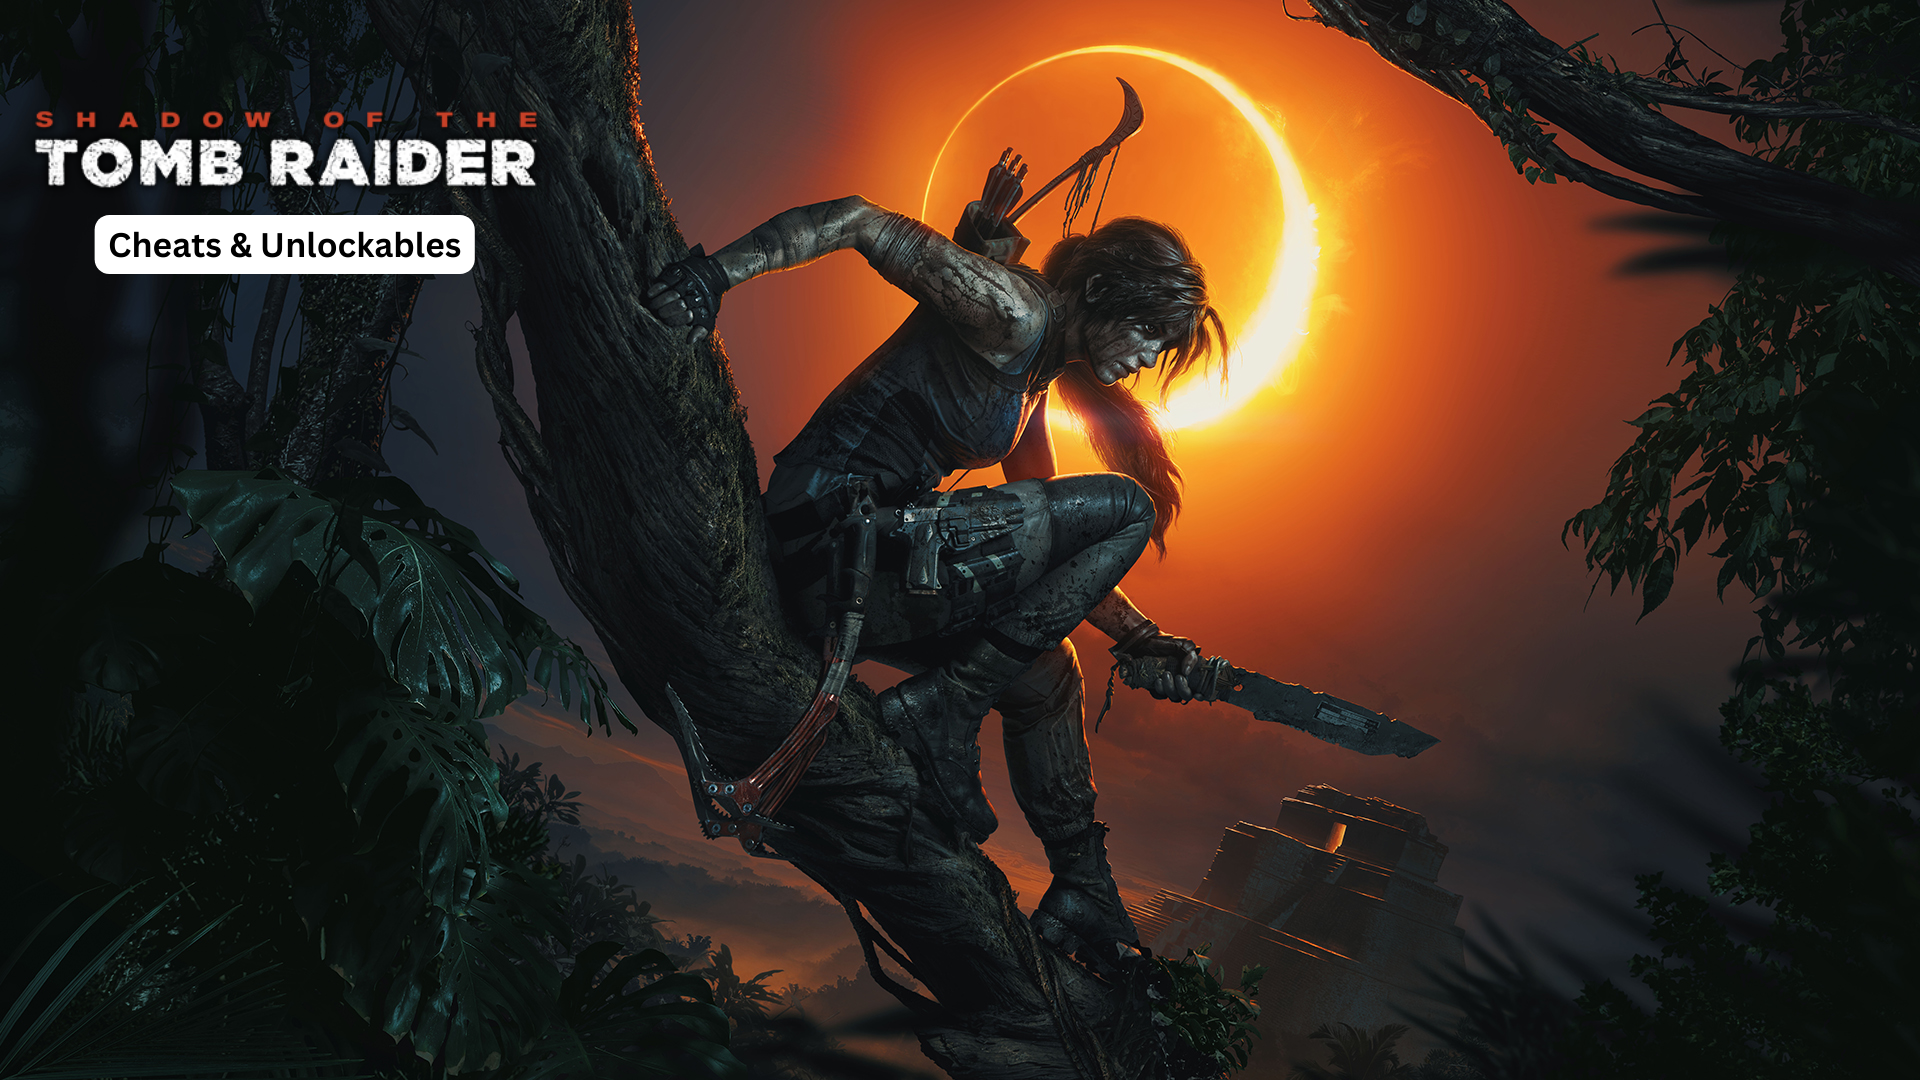 shadow of the tomb raider cheats and unlockables